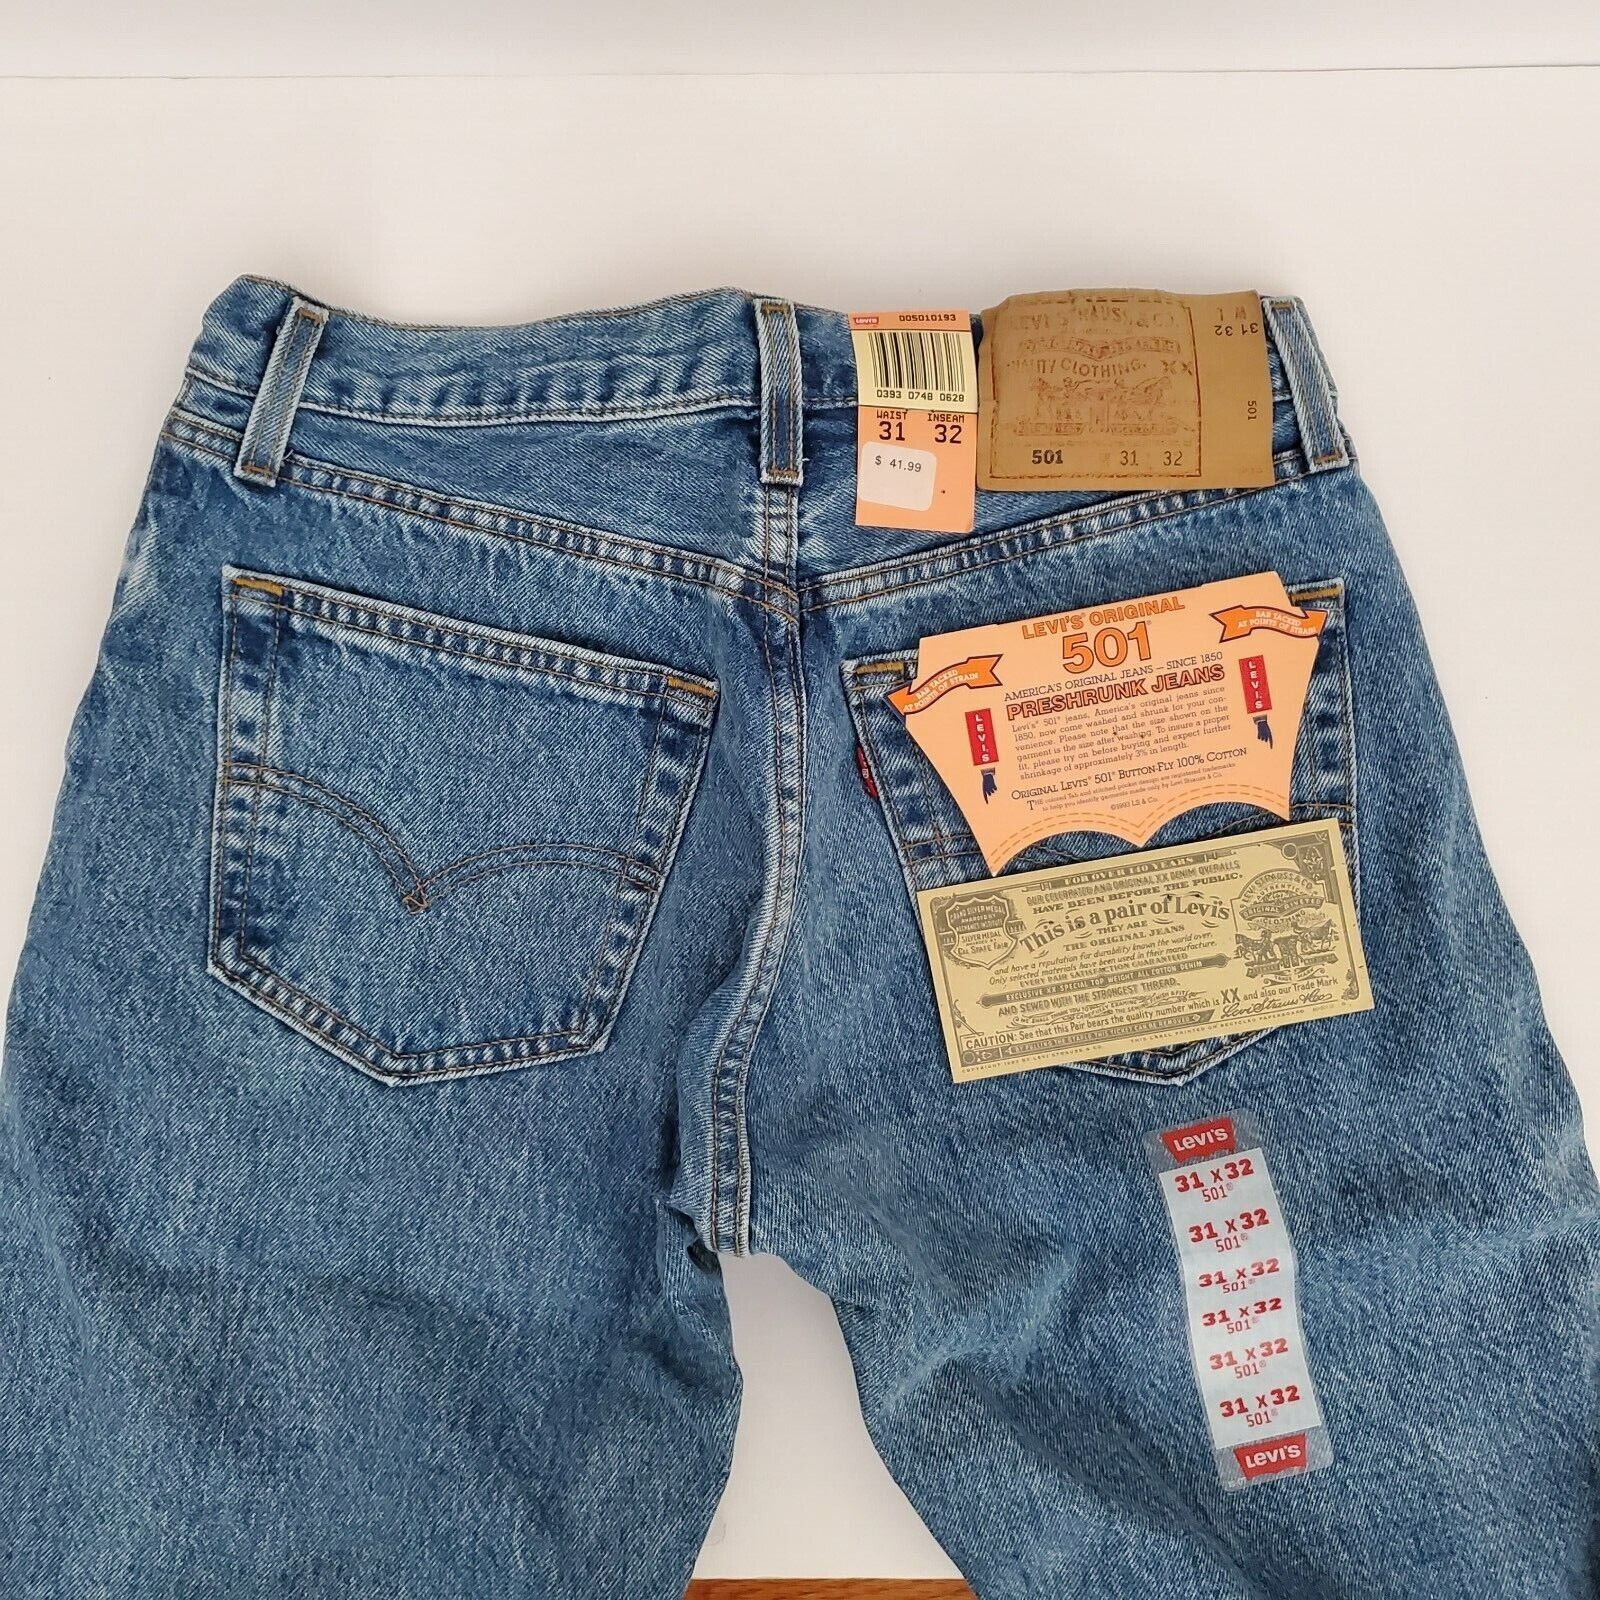 wise It's lucky that ebb tide Vintage 90s Levis 501 Jeans 31x32 Preshrunk New with Tags Deadstock Made in  USA | eBay